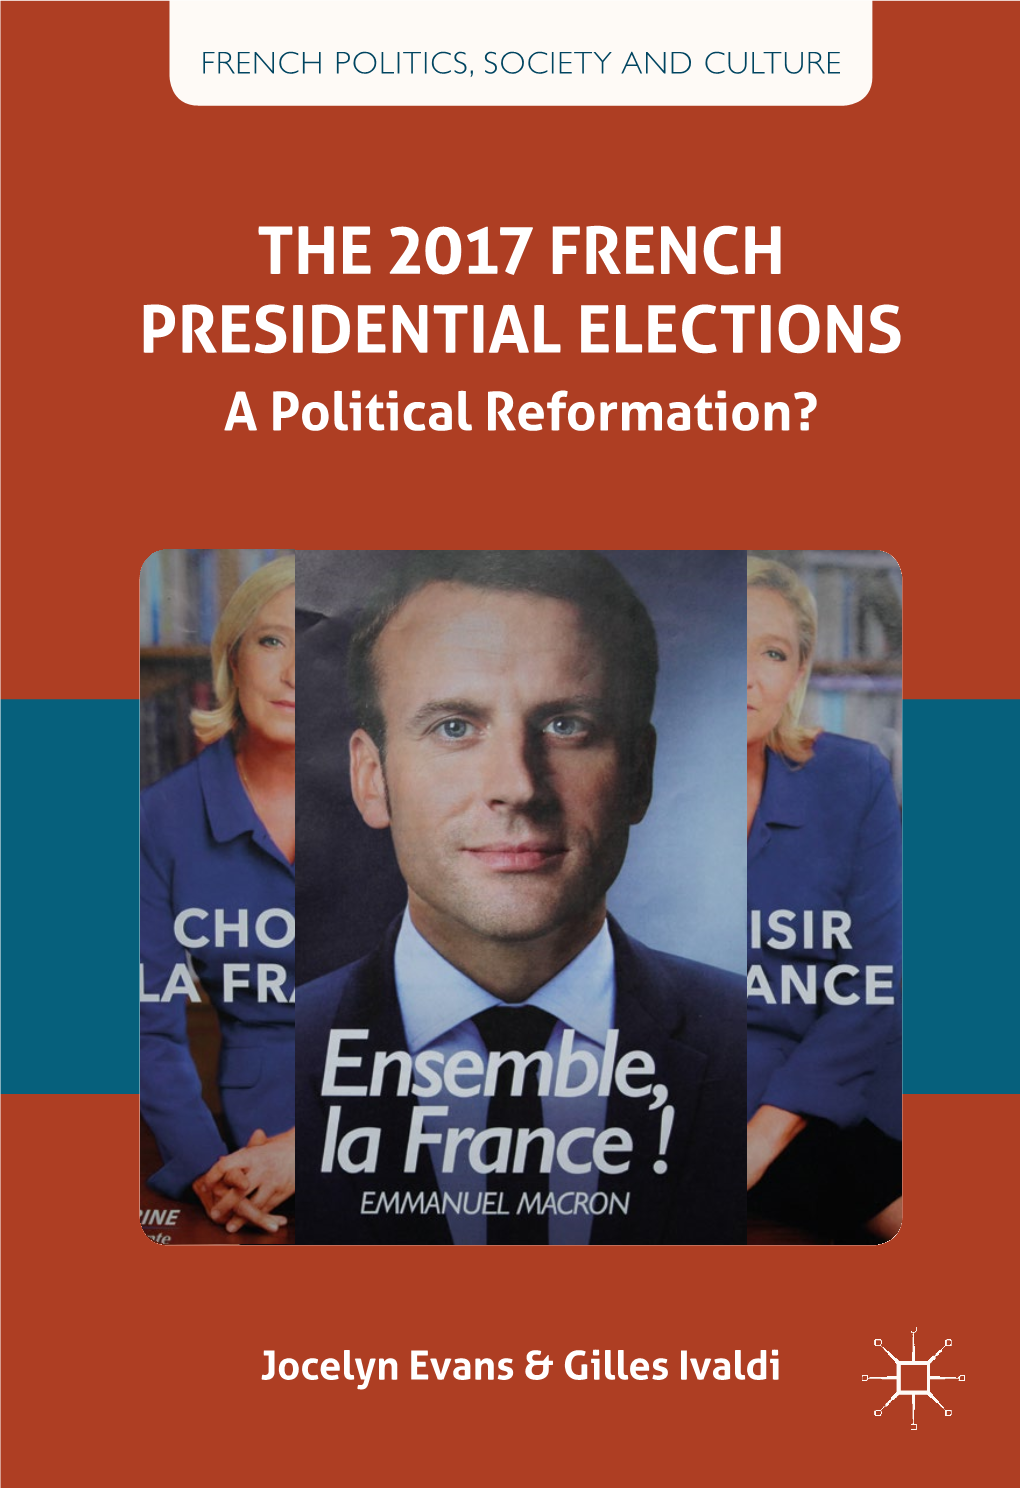 THE 2017 FRENCH PRESIDENTIAL ELECTIONS a Political Reformation?